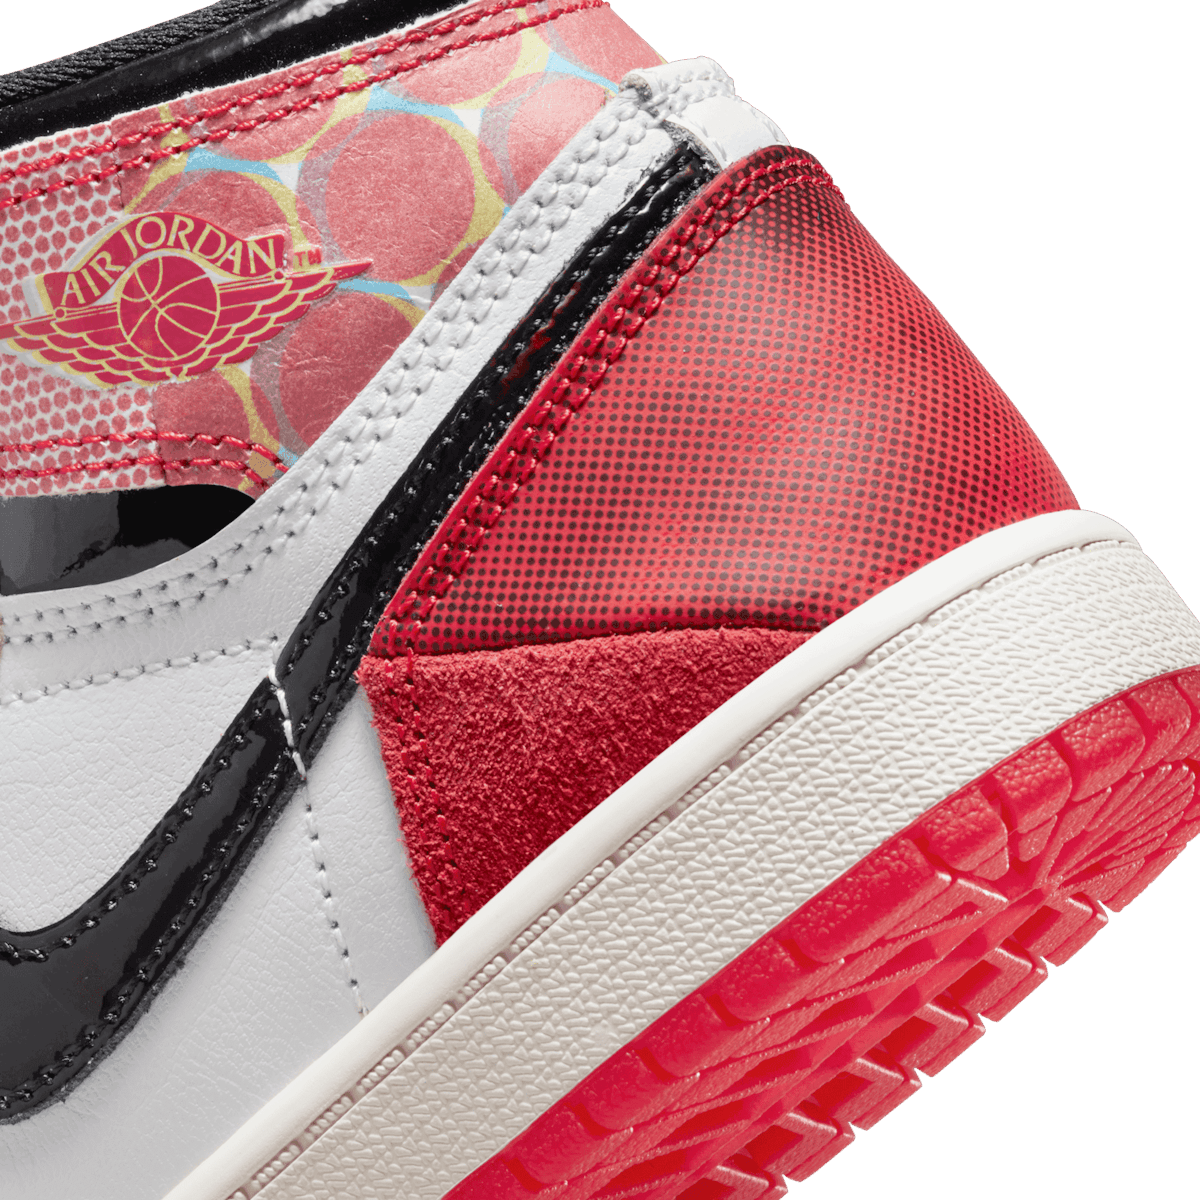 Where to Buy the Air Jordan 1 High OG “Washed Heritage”